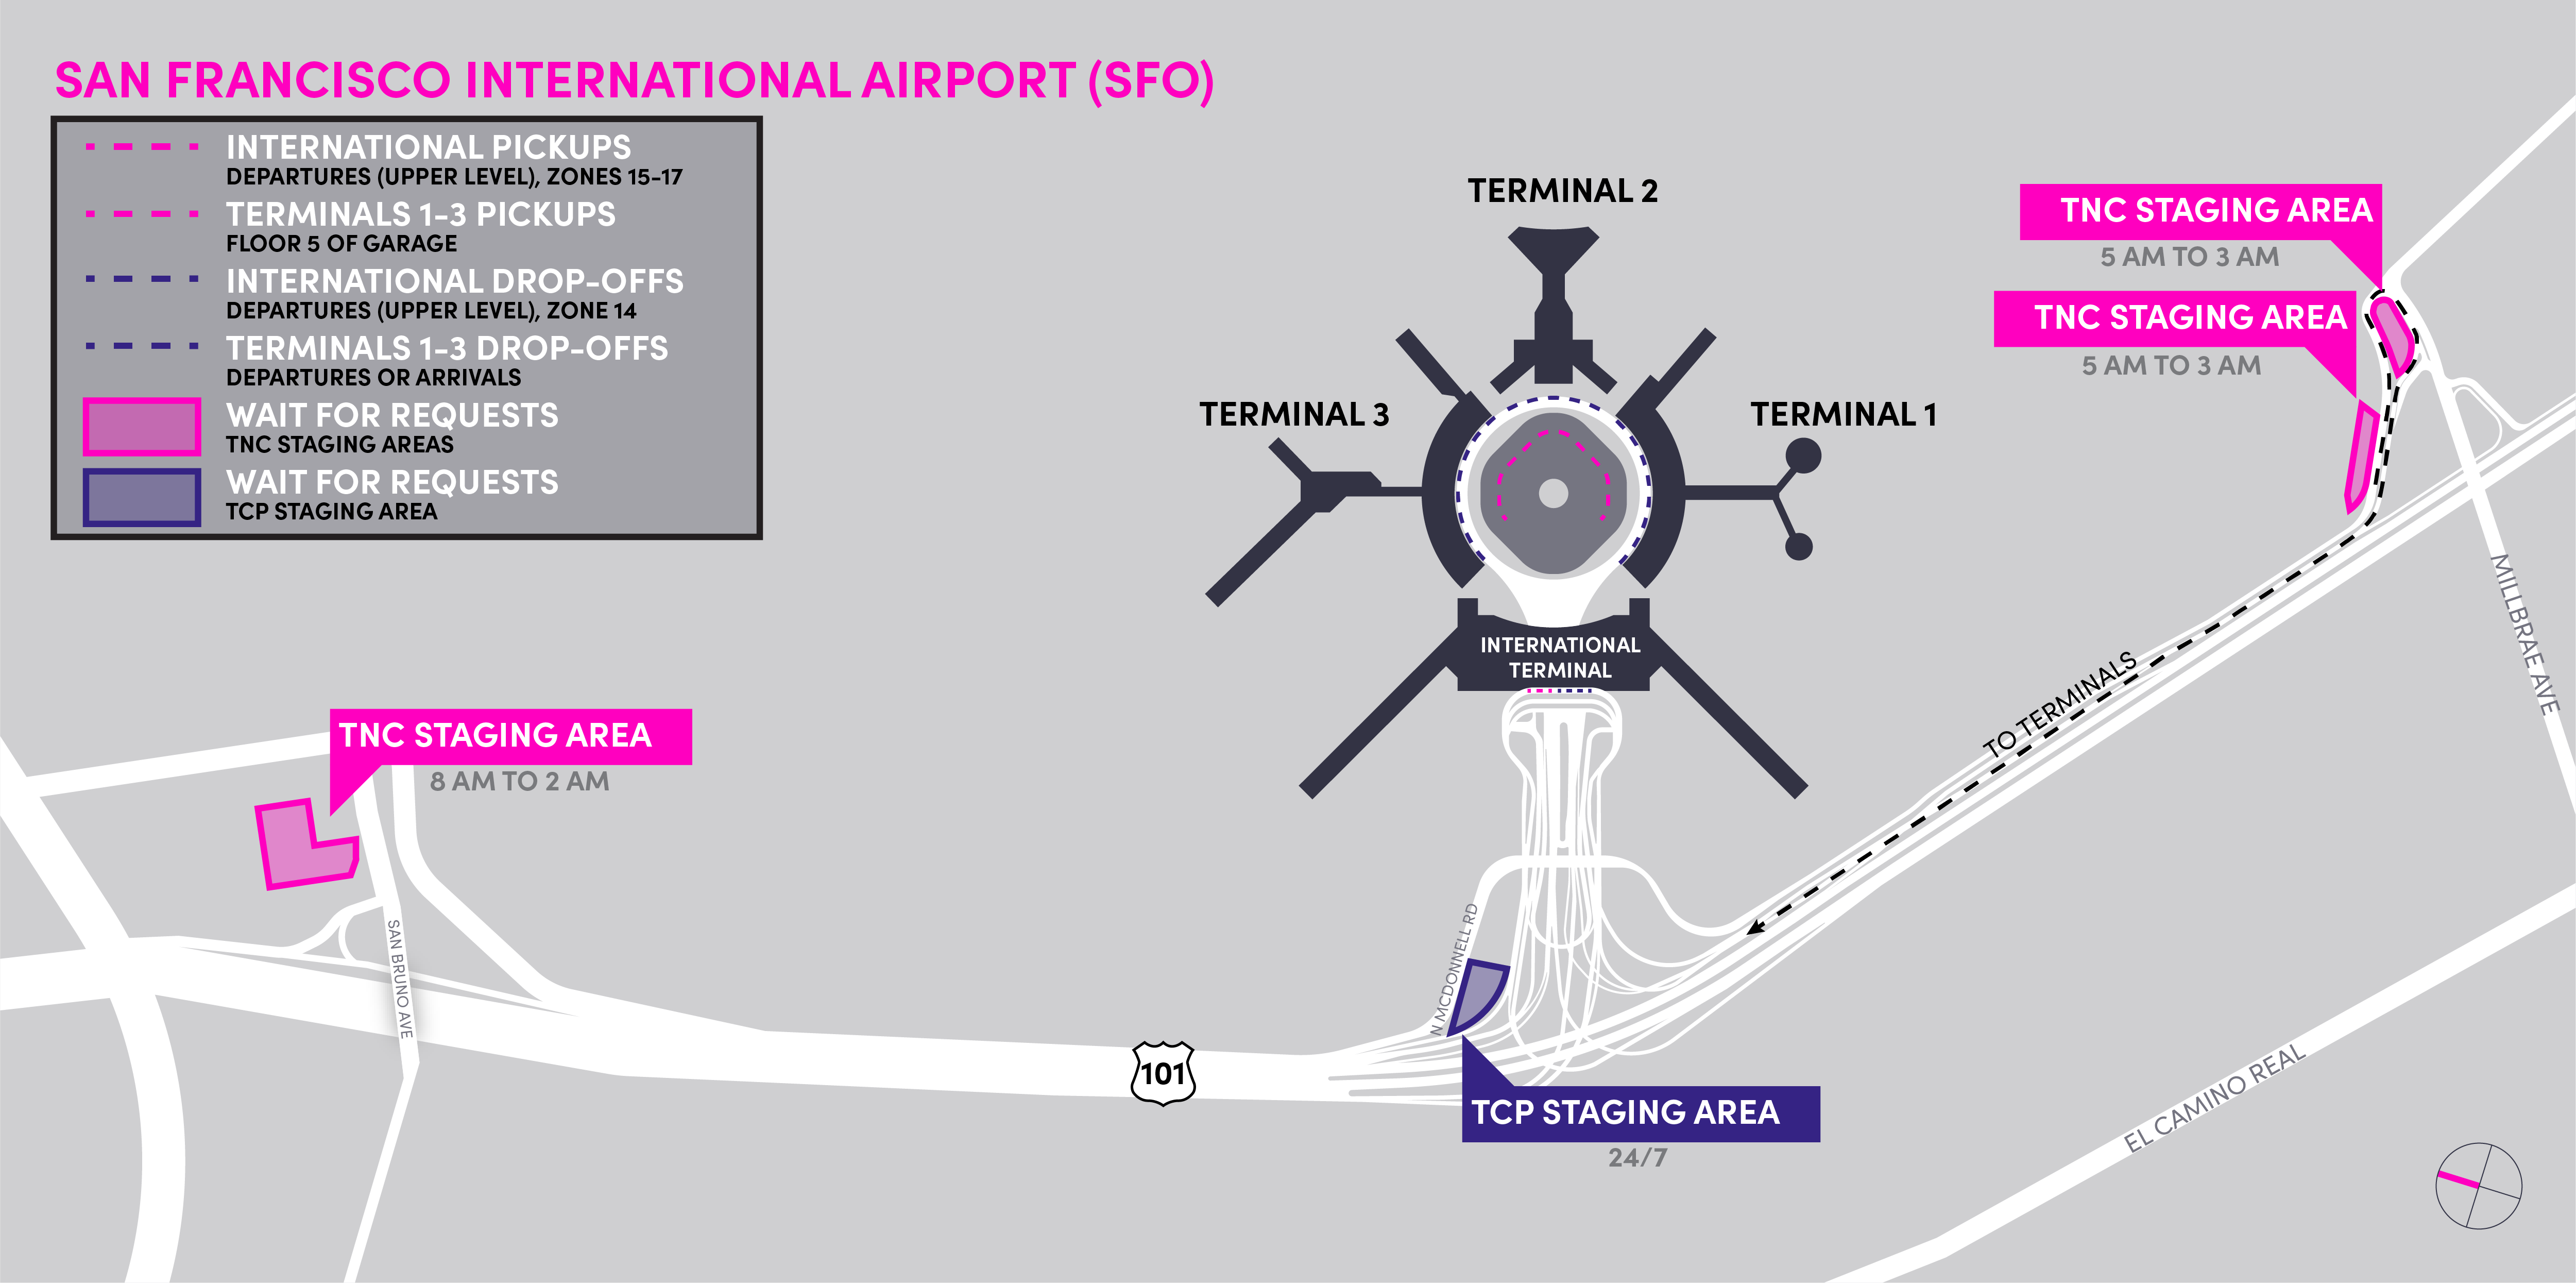 Map of TNC and TCP staging areas at San Francisco International Airport